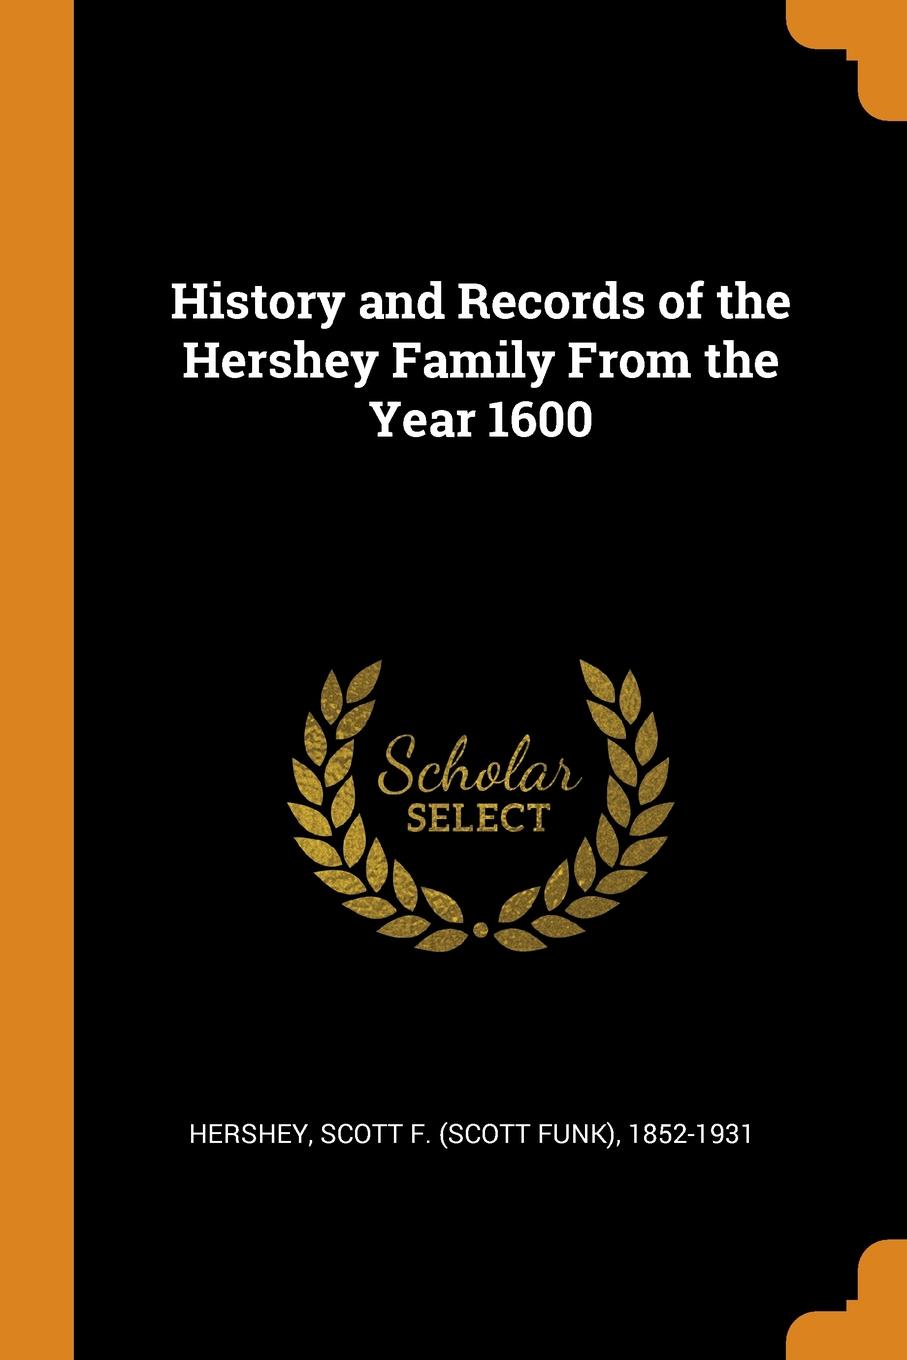 History and Records of the Hershey Family From the Year 1600